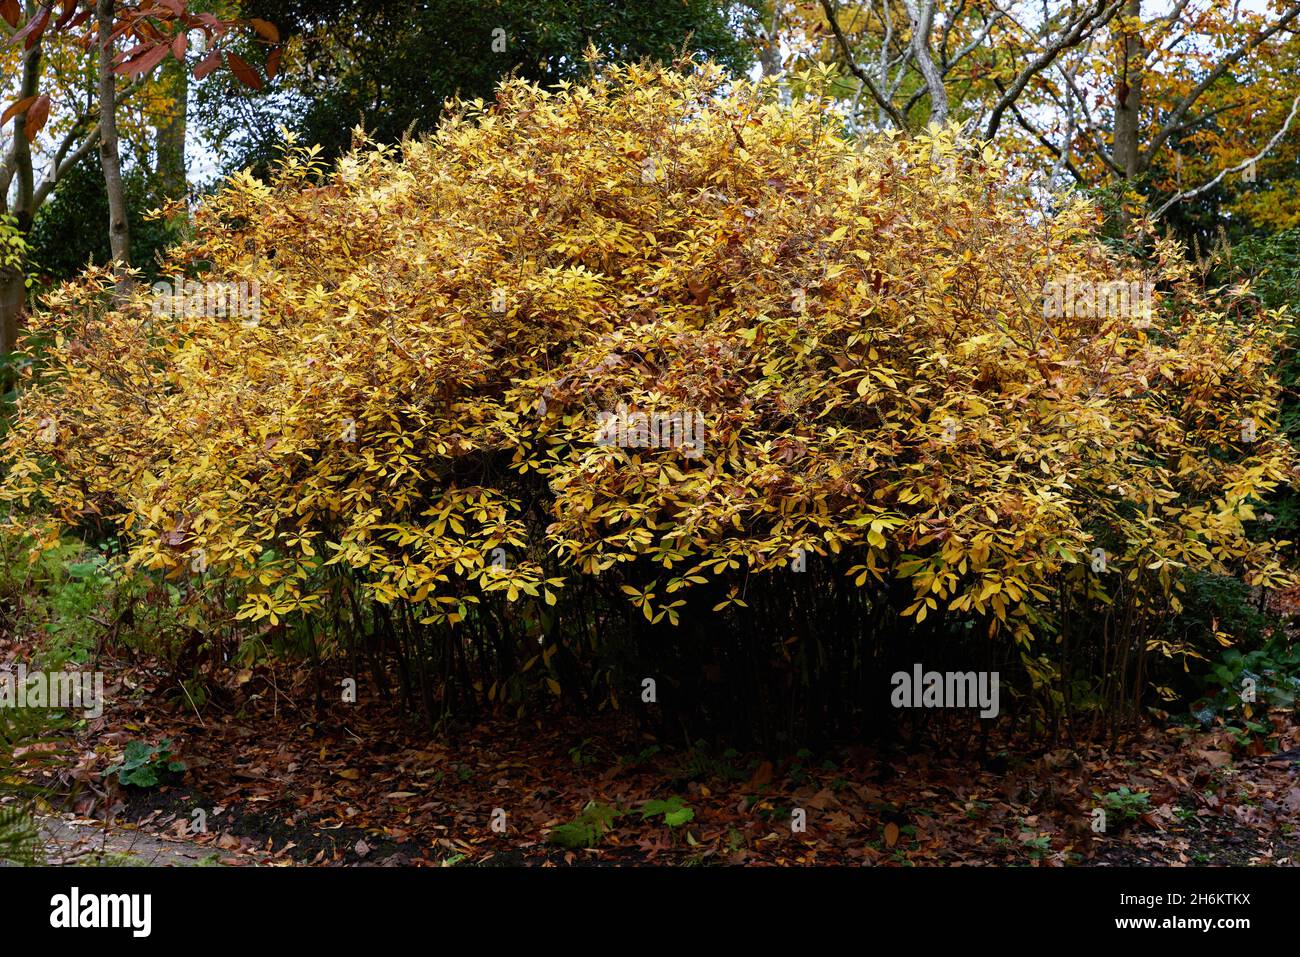 Clethra alnifolia Rosea seen in the garden with autumn coloured leaves. Stock Photo